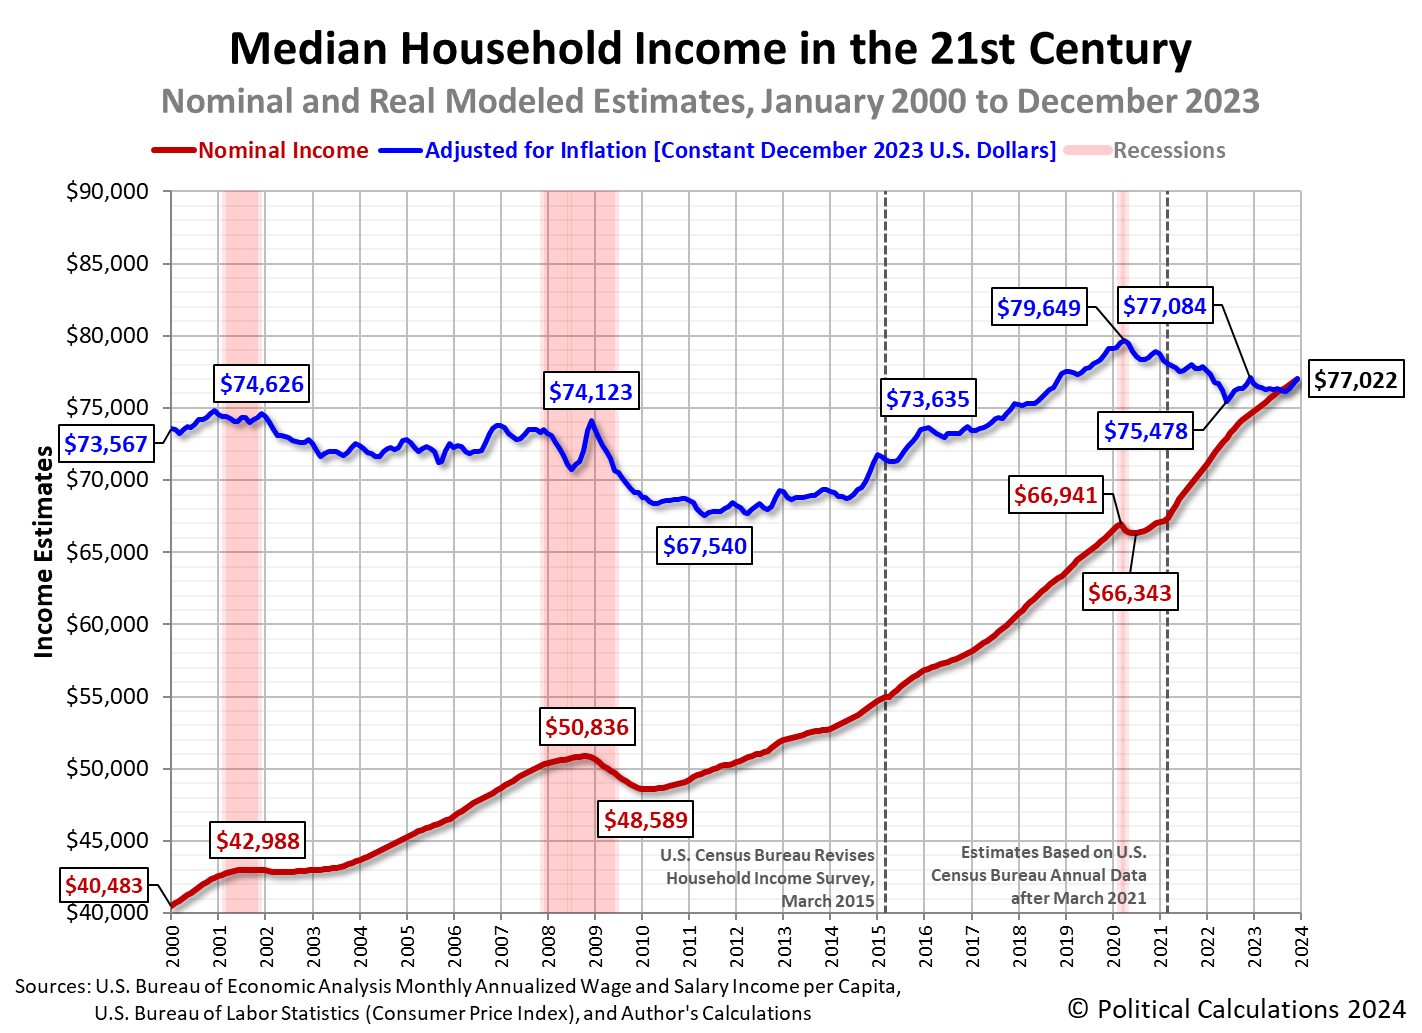 saupload_median-household-income-in-21st-century-200001-202312.png